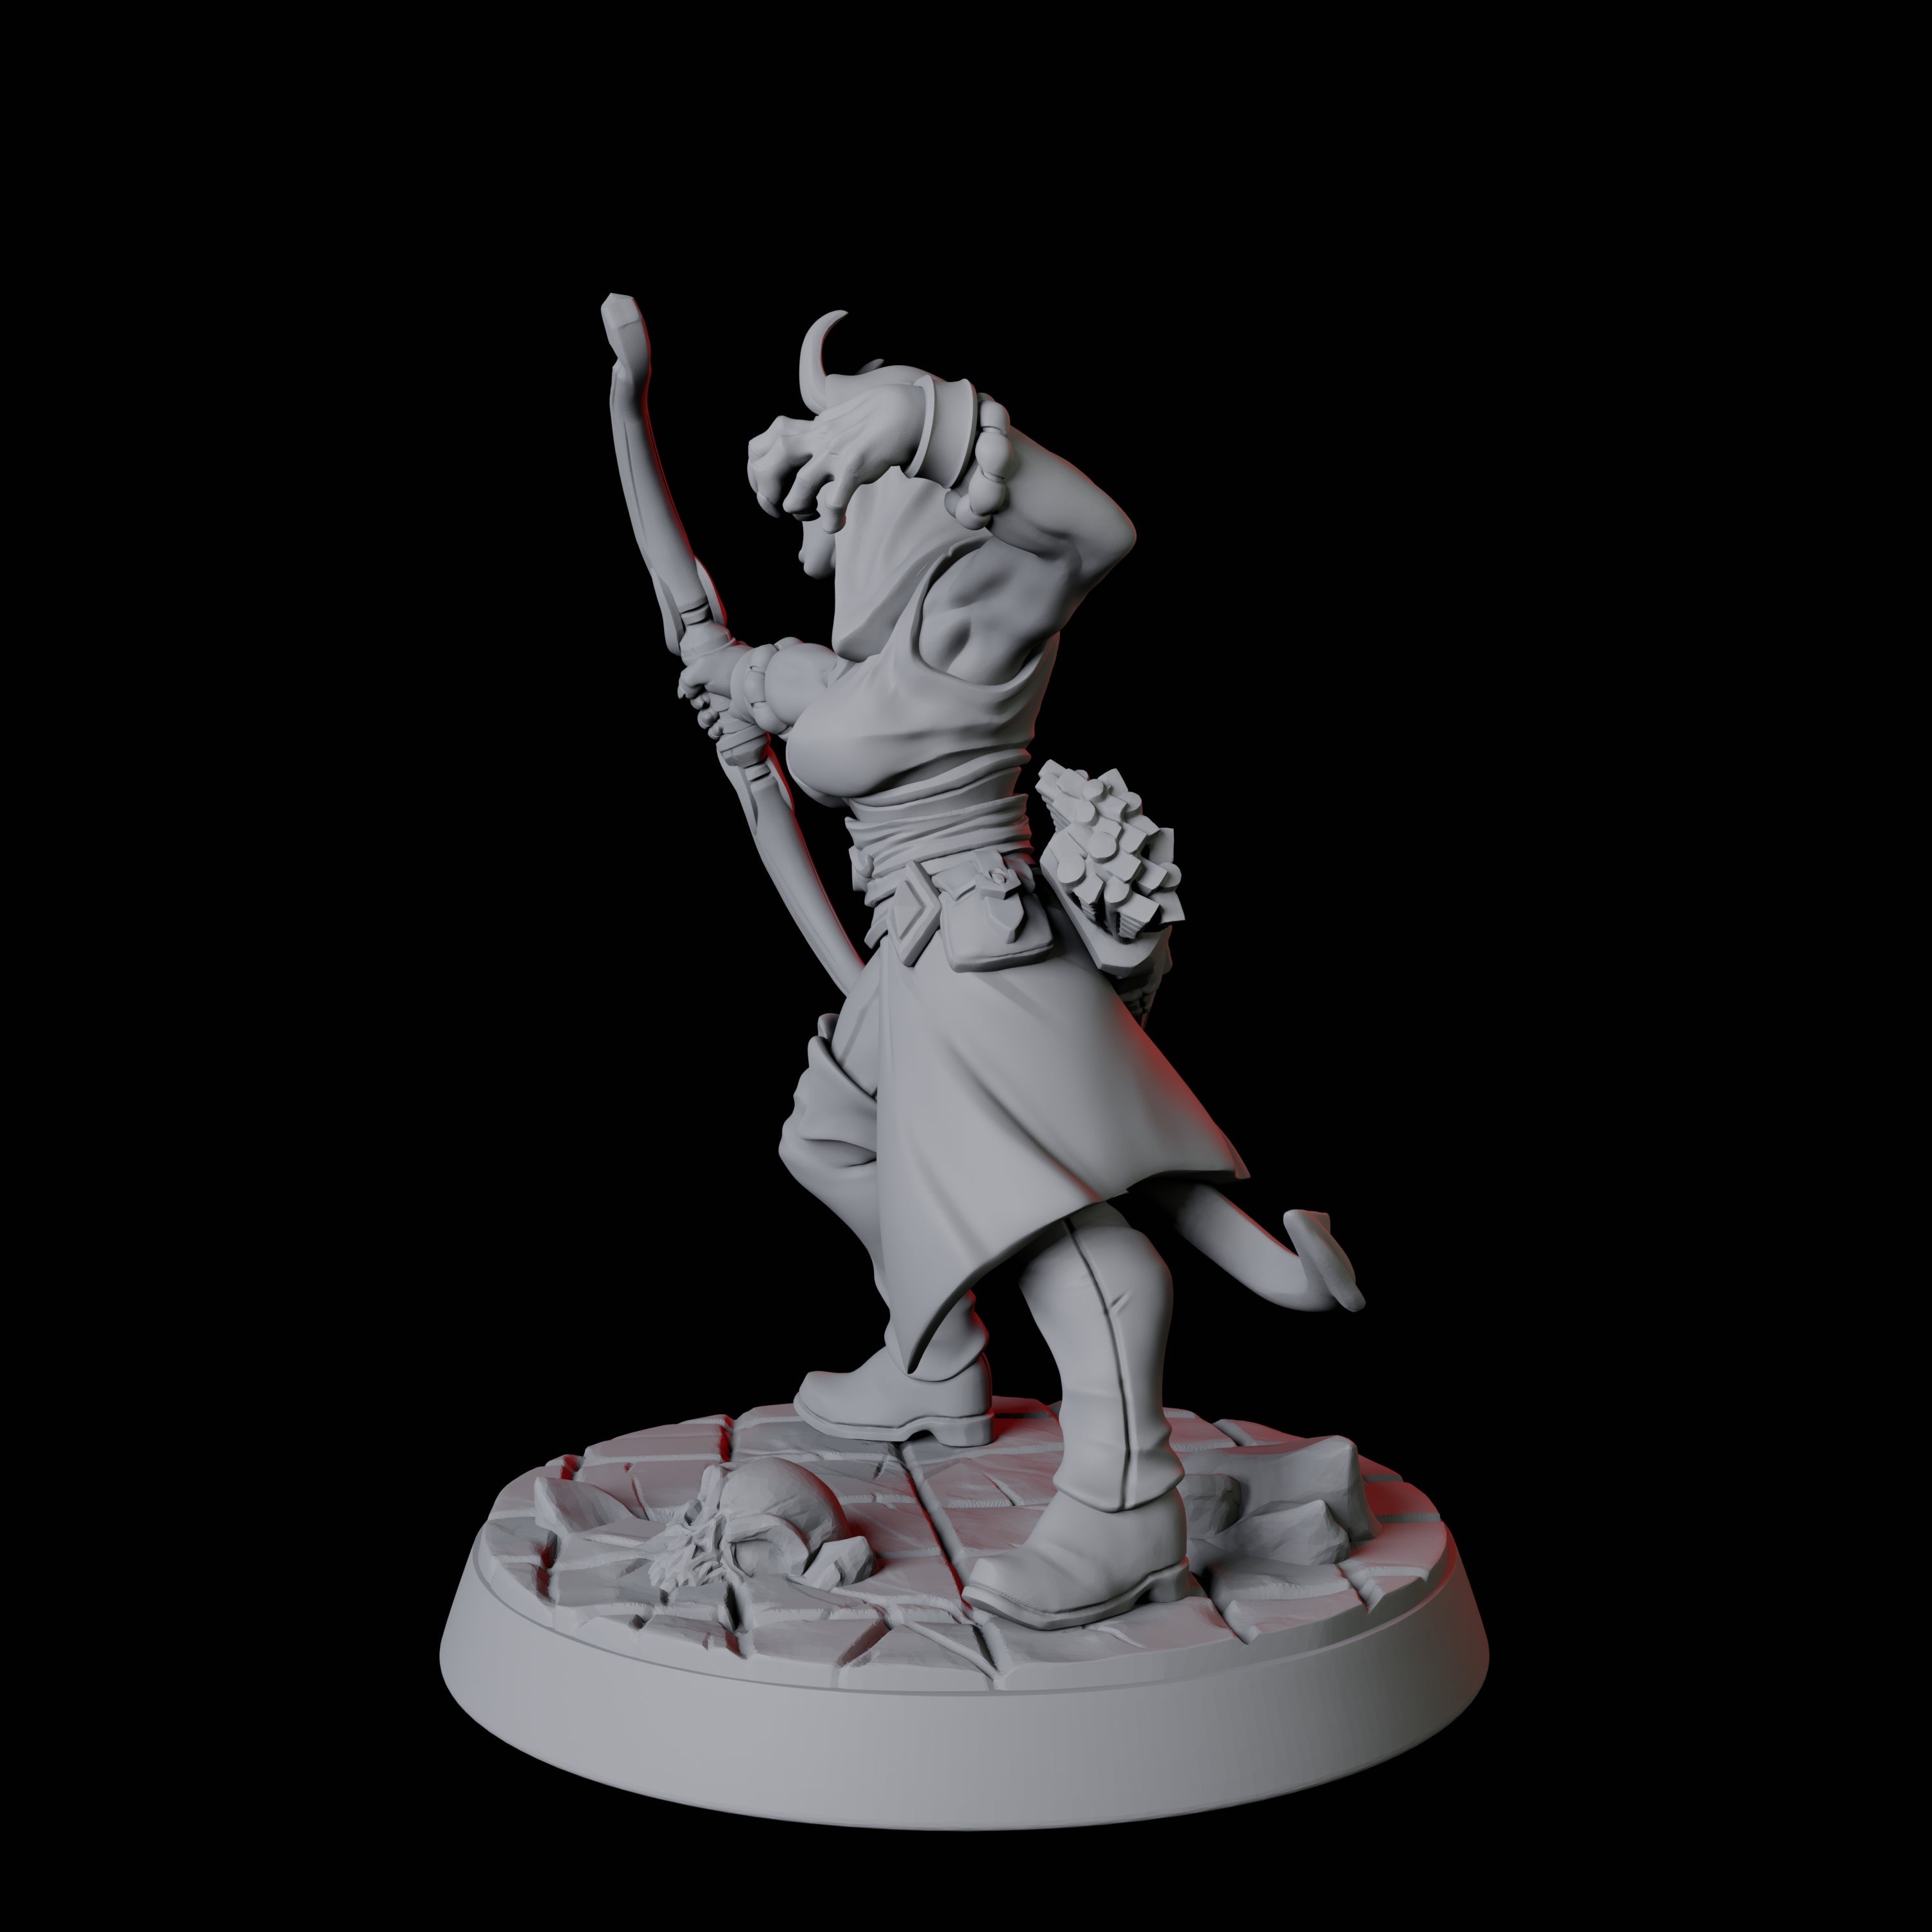 Tiefling Fighter F Miniature for Dungeons and Dragons, Pathfinder or other TTRPGs